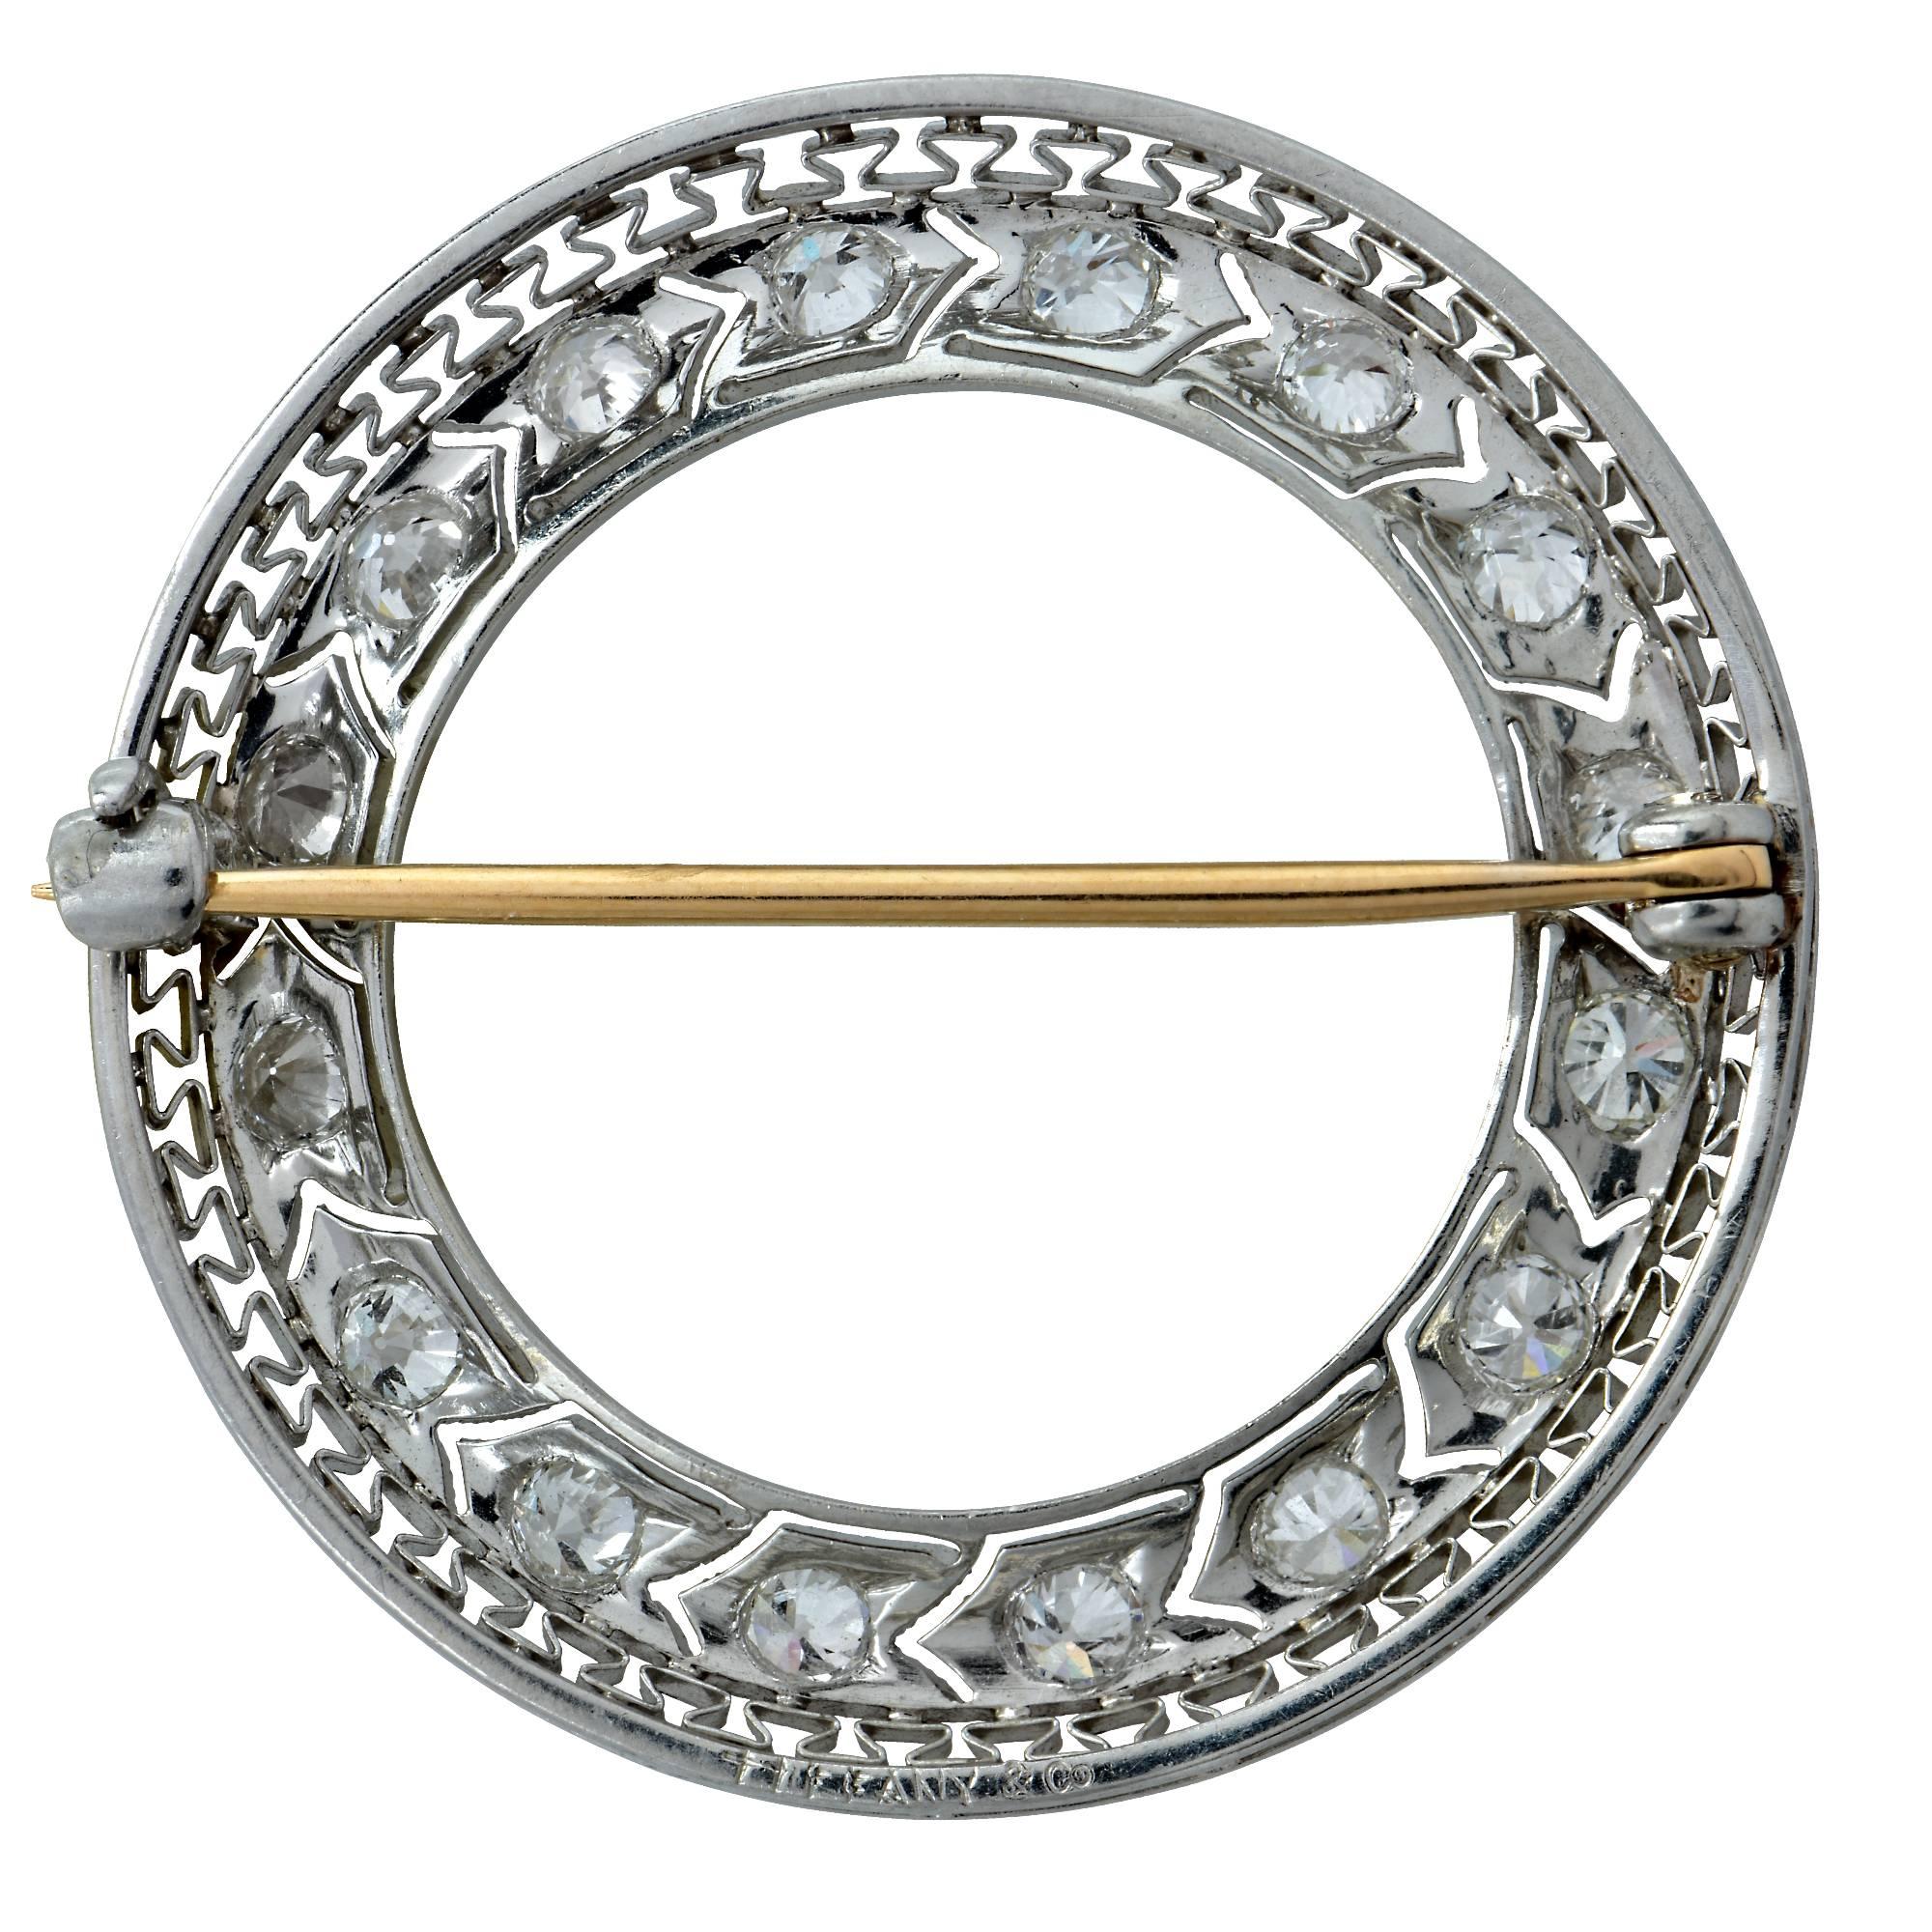 Exquisite Tiffany & Co. Art Deco brooch pin crafted in Platinum featuring 16 old european cut diamonds, G color VS quality weighing 1 carat total weight with beautiful intricate millegraine and geometric filigree work set in a circle. This rare